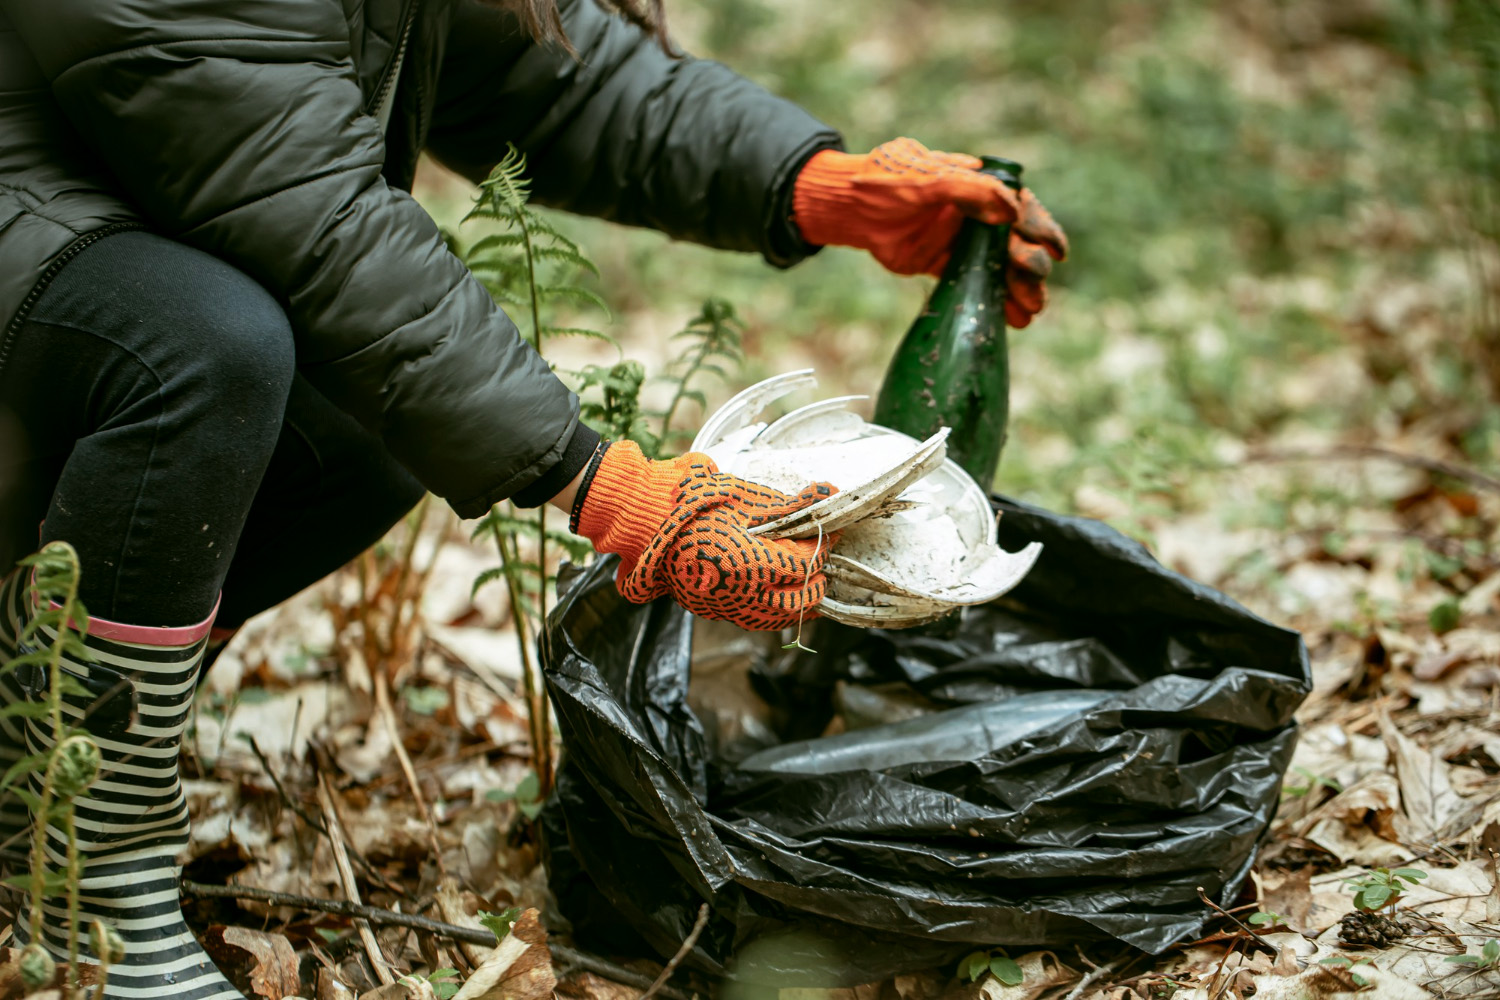 Cleaning up trash inside of the woods.